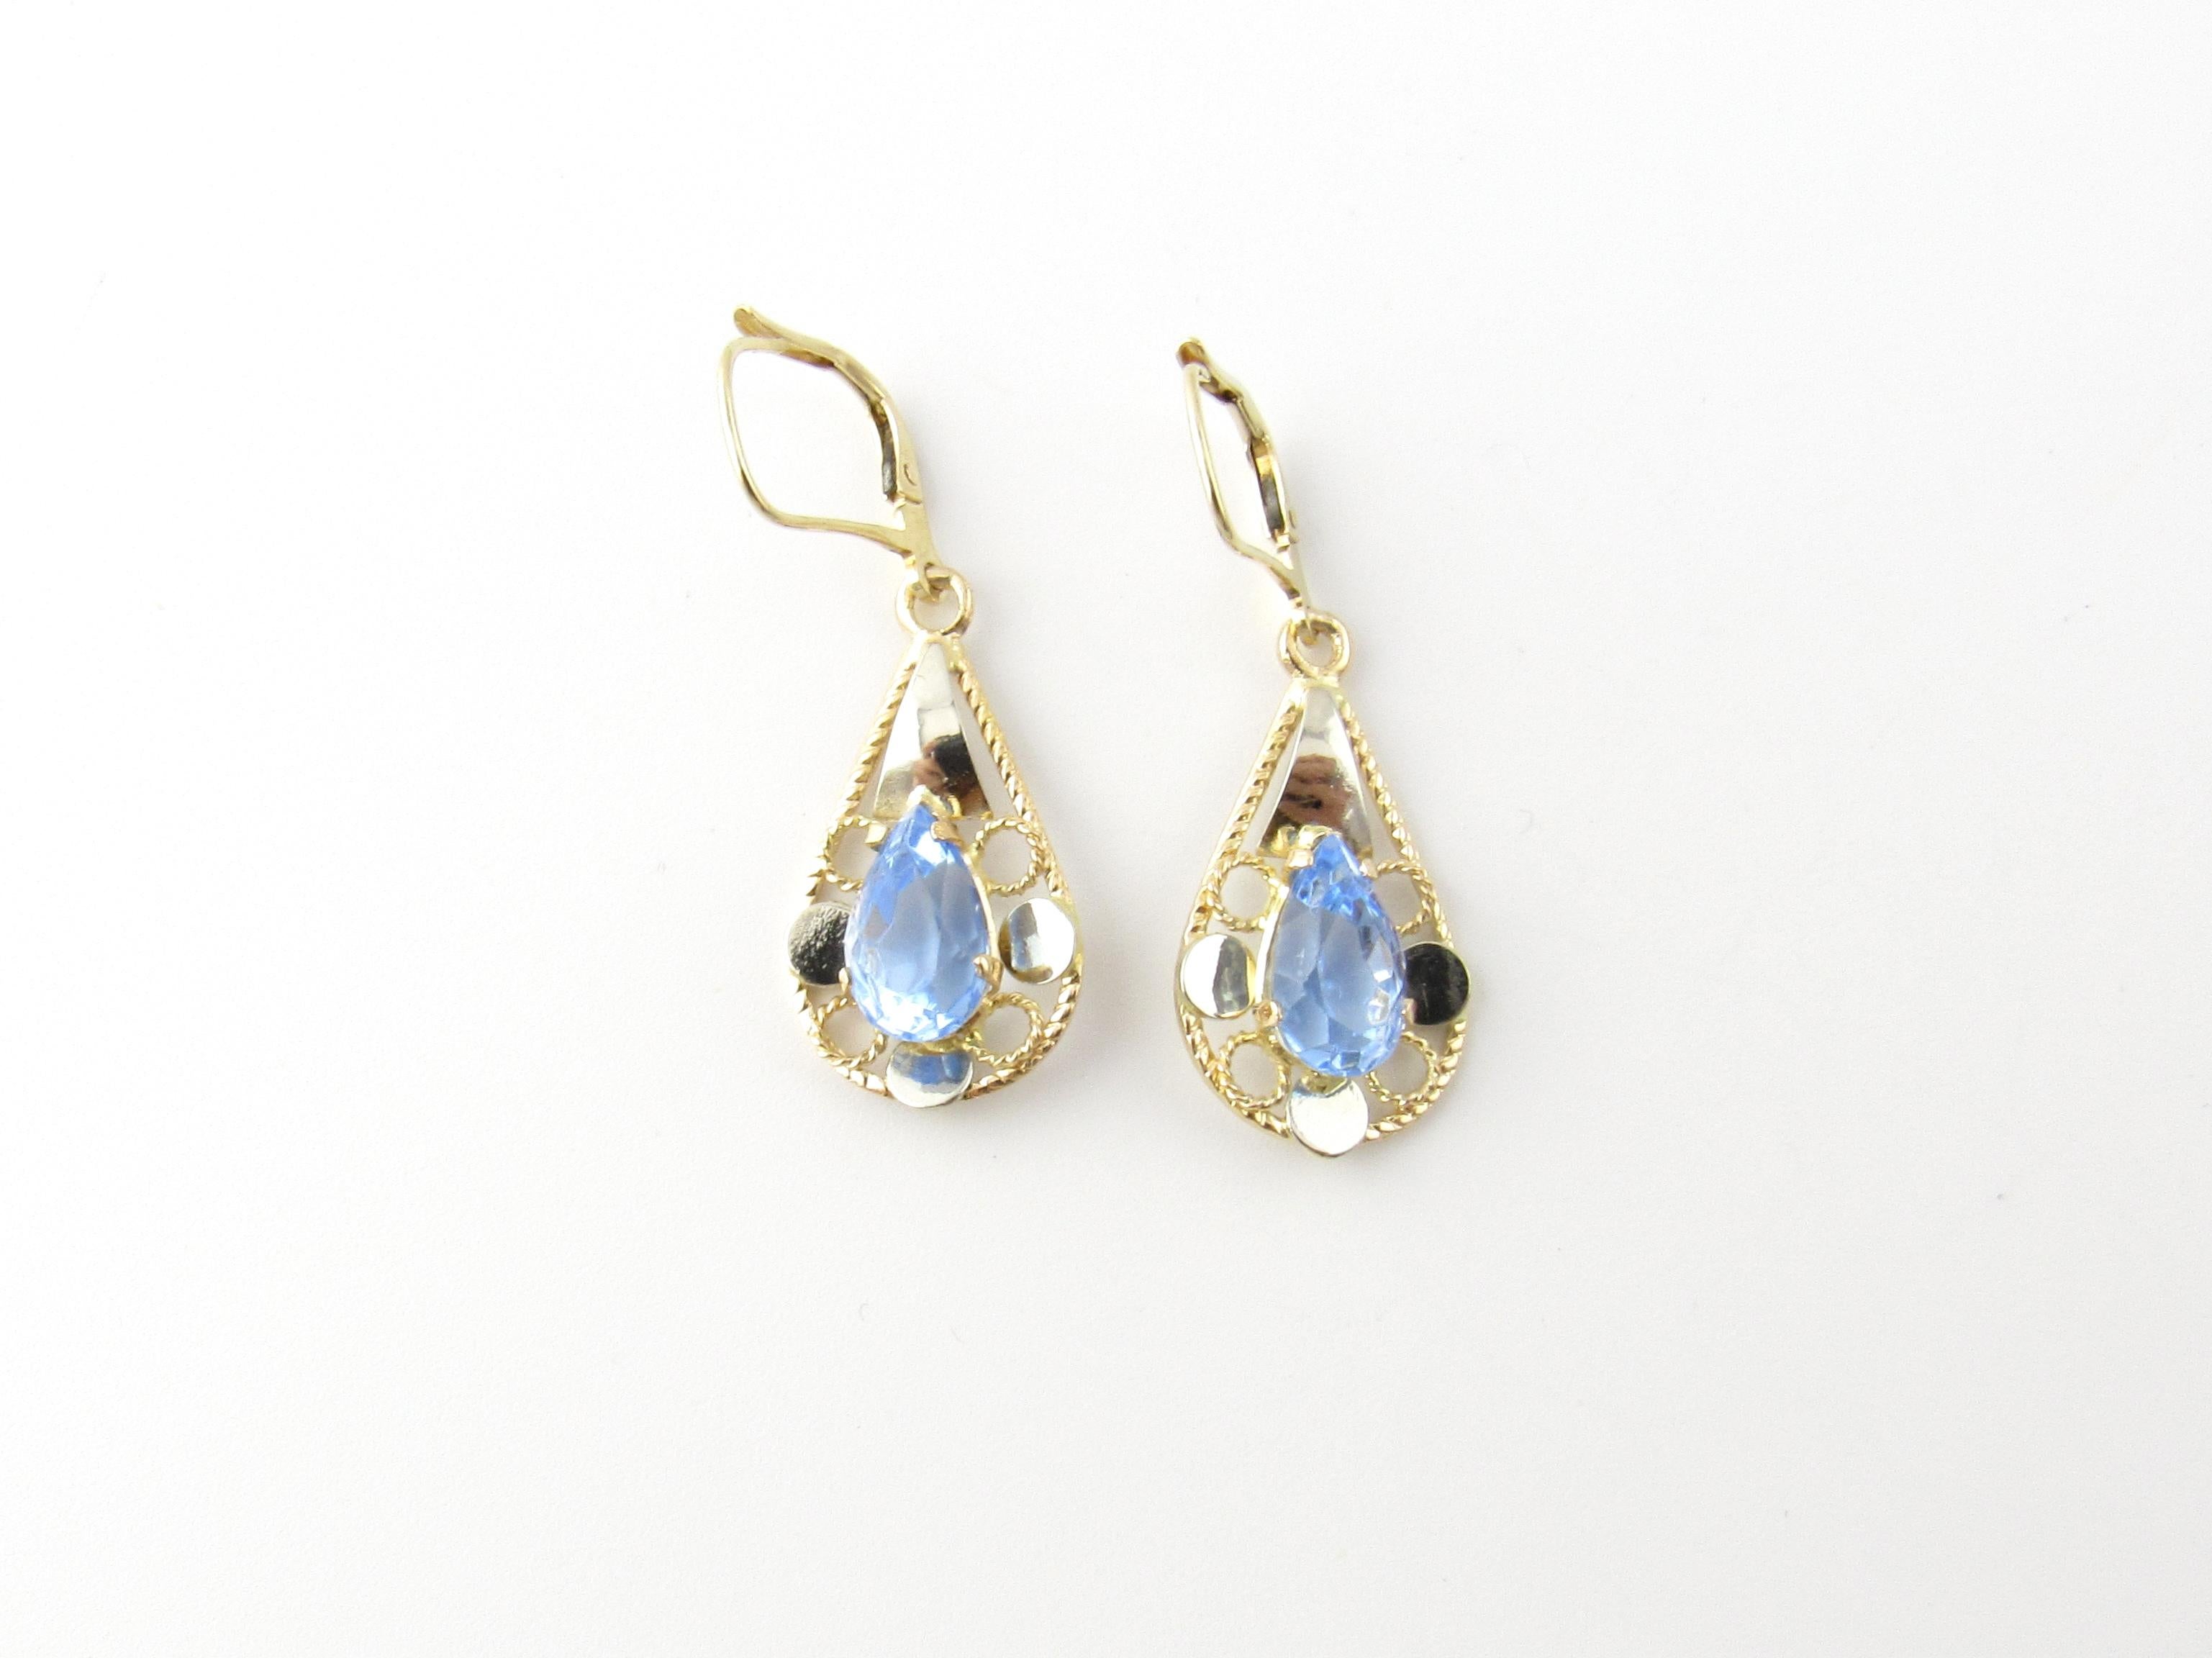 Vintage 18 Karat Yellow Gold Blue Topaz Earrings

These elegant dangling earrings each feature one pear-shaped blue topaz (10 mm x 7 mm) set in beautifully detailed 18K yellow gold.

Size: 34 mm x 12 mm

Weight: 2.6 dwt. / 4.1 gr.

Stamped: